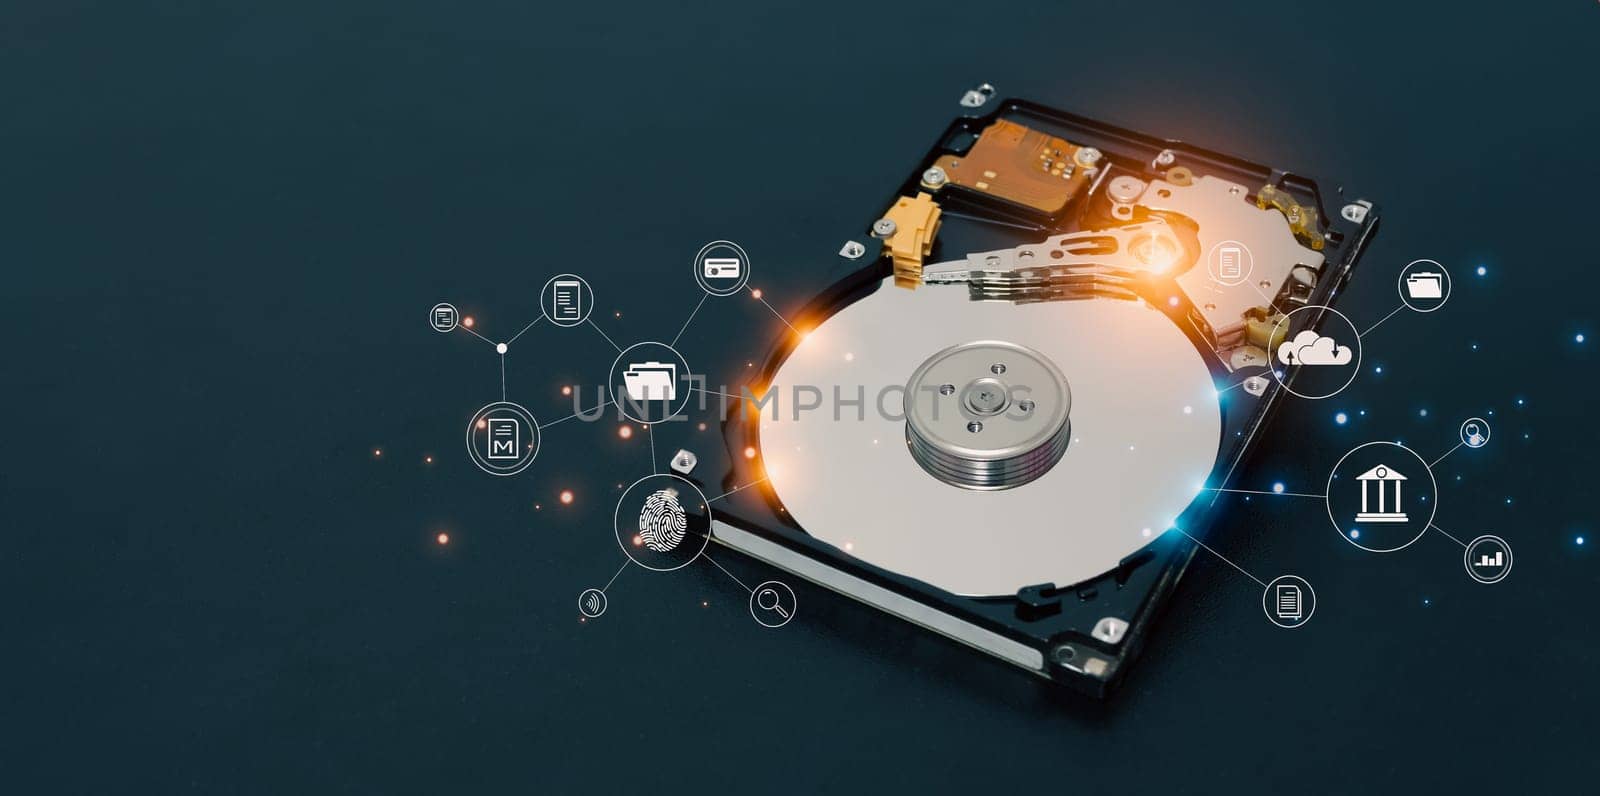 Hard drives are important storage devices. Business information. Document information. The concept of protecting data with security by Unimages2527